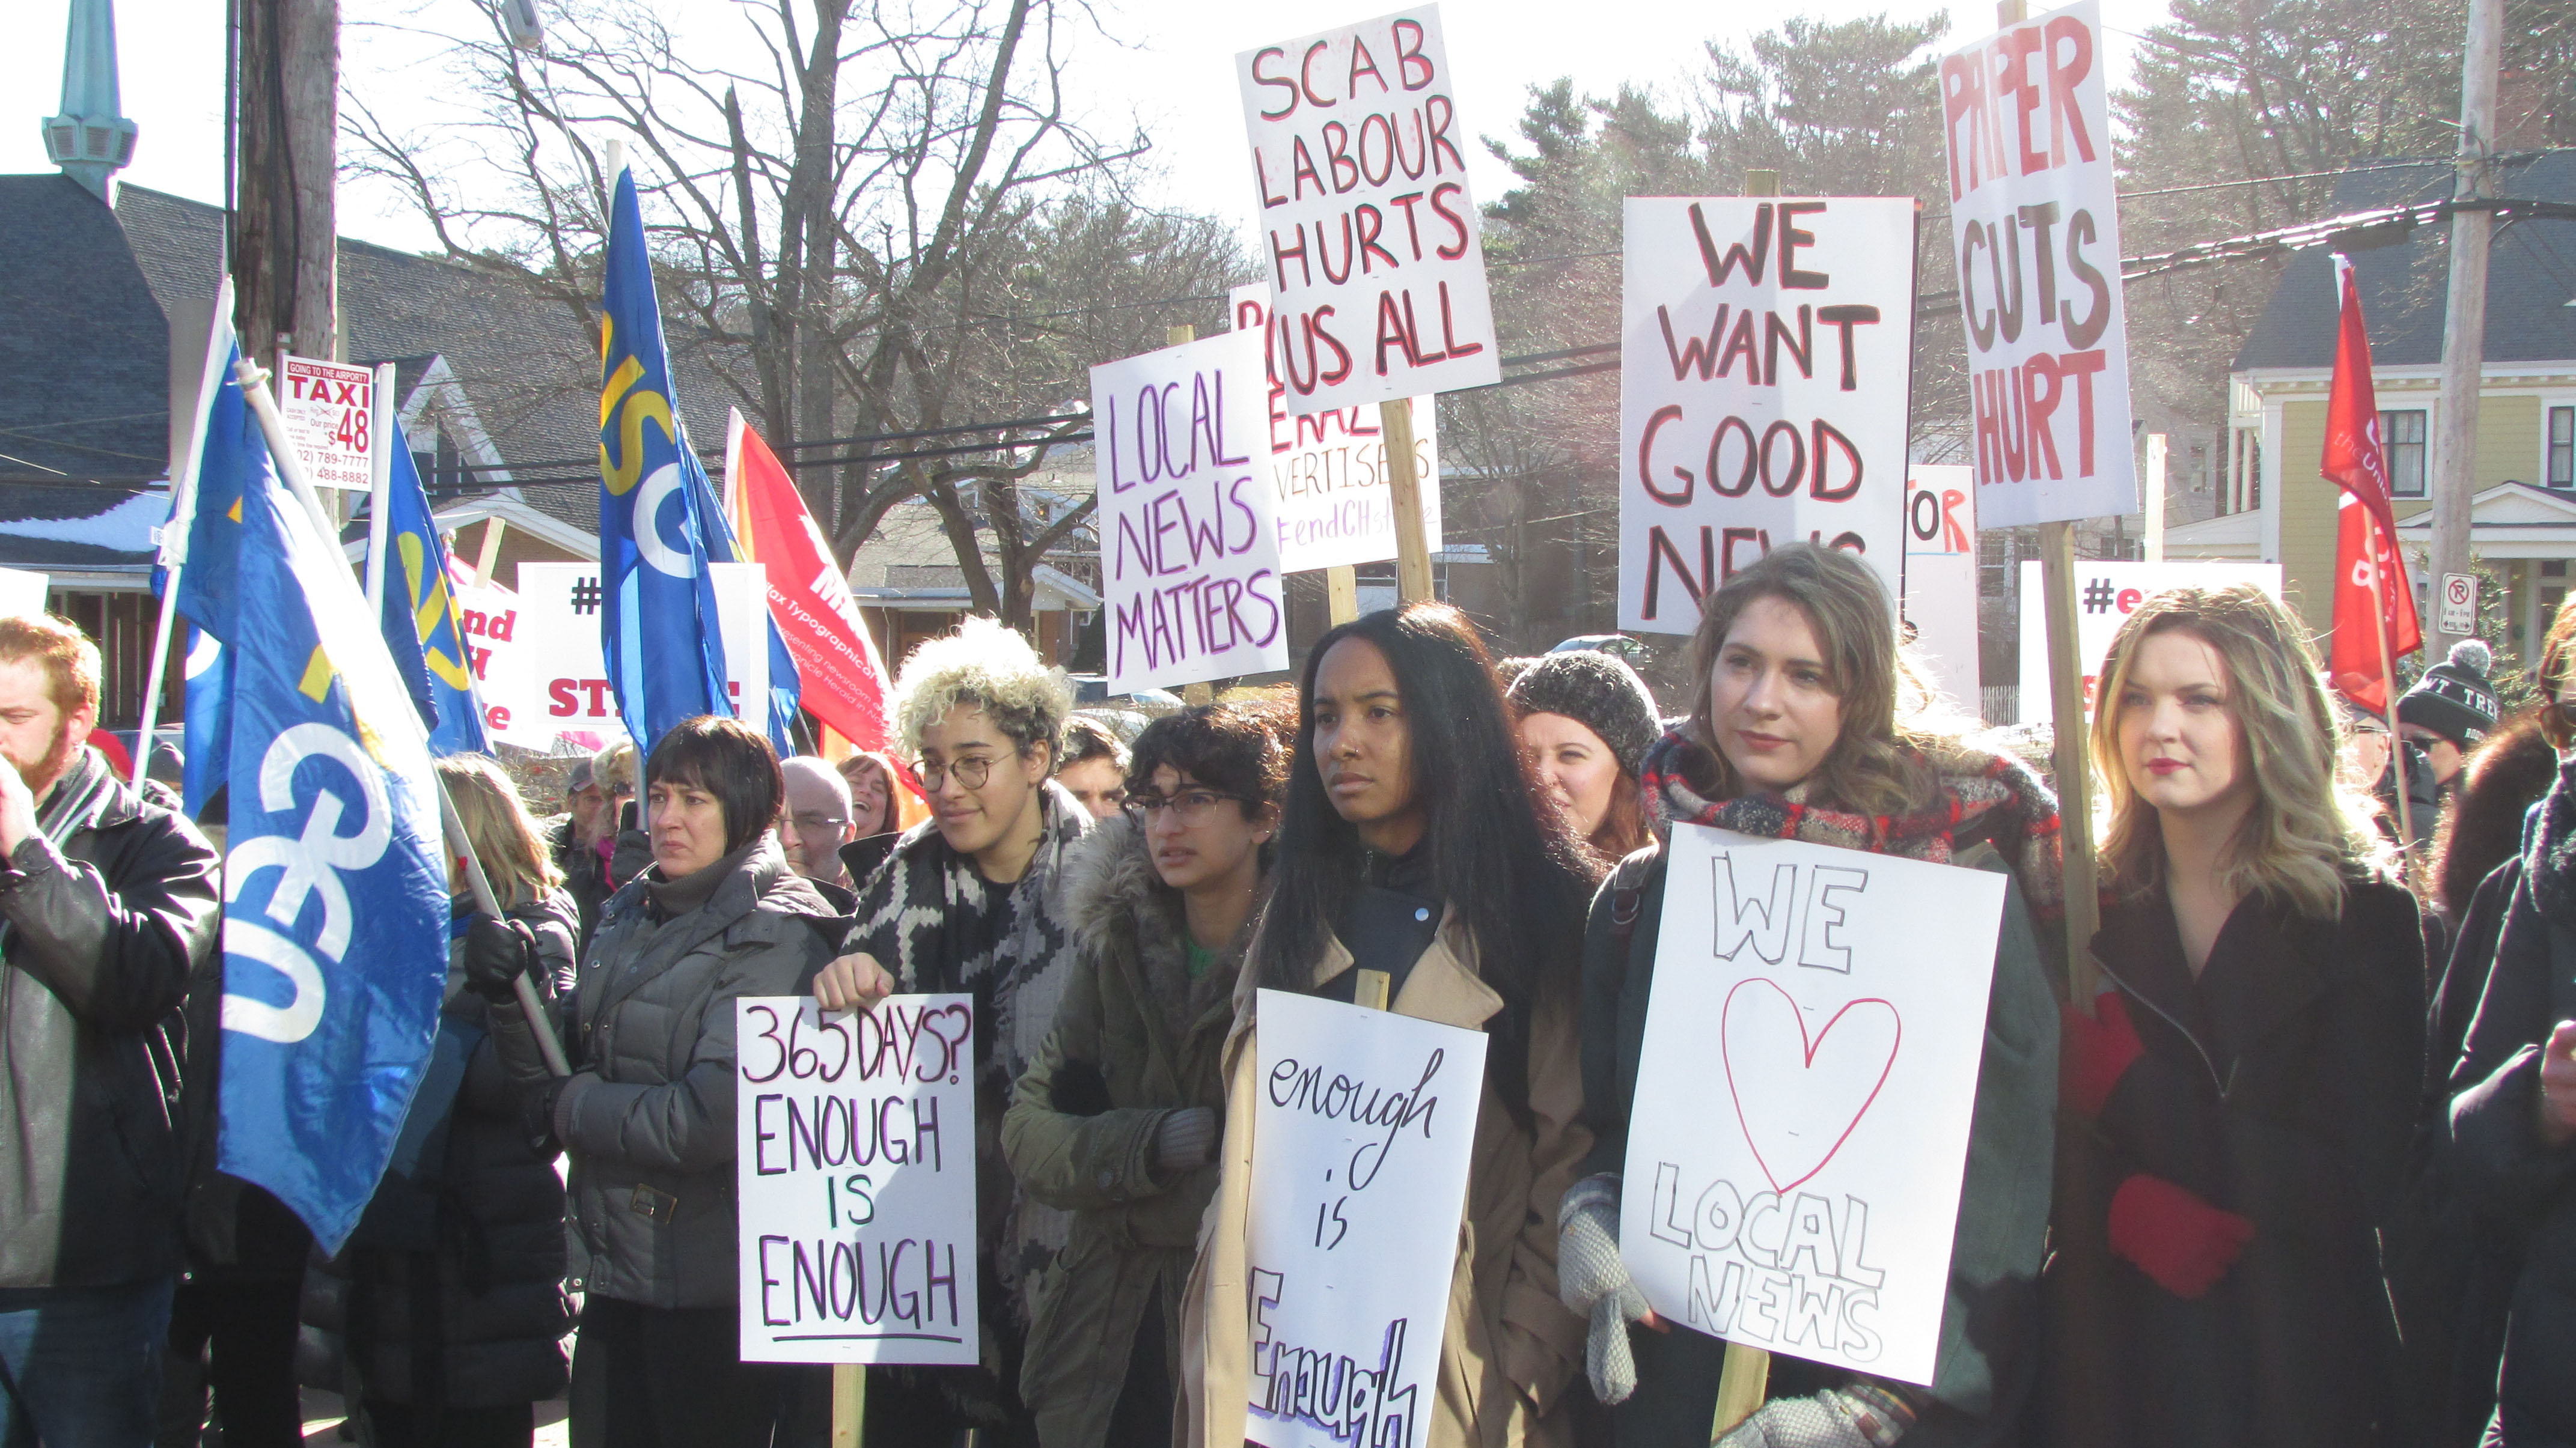 People of all ages gathered at the Chronicle Herald protest holding signs and flags.